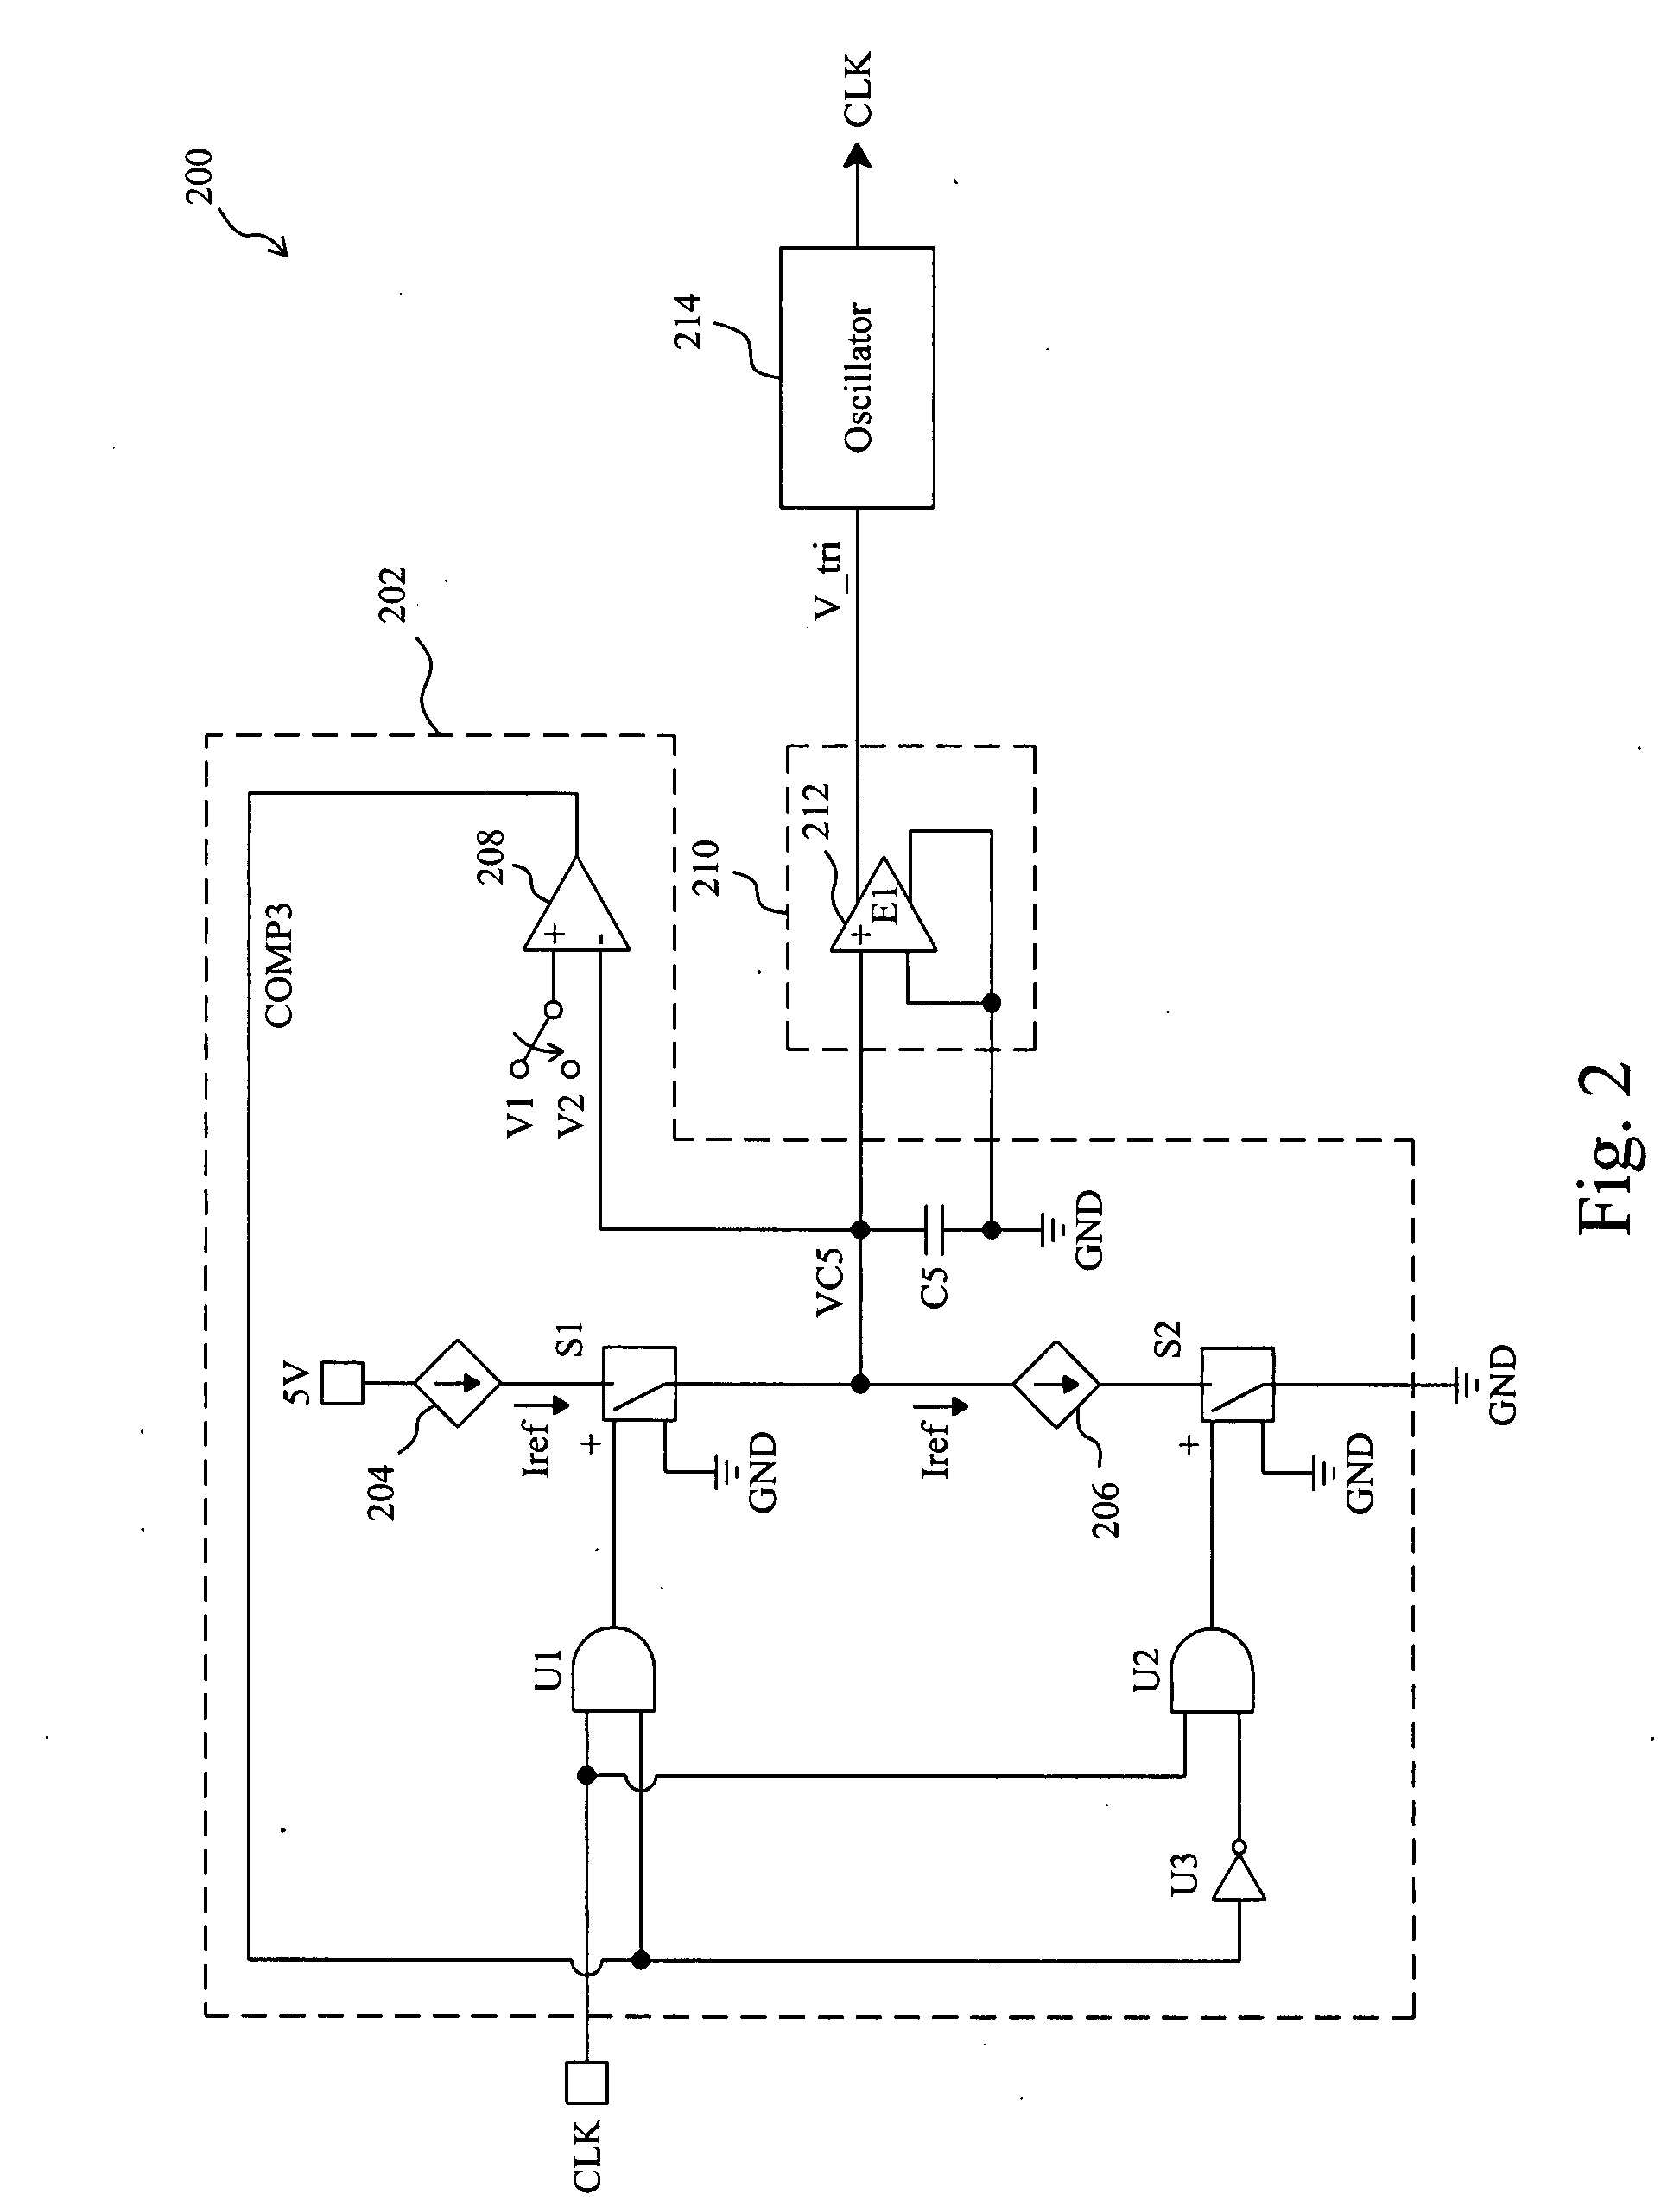 Frequency jittering control for varying the switching frequency of a power supply